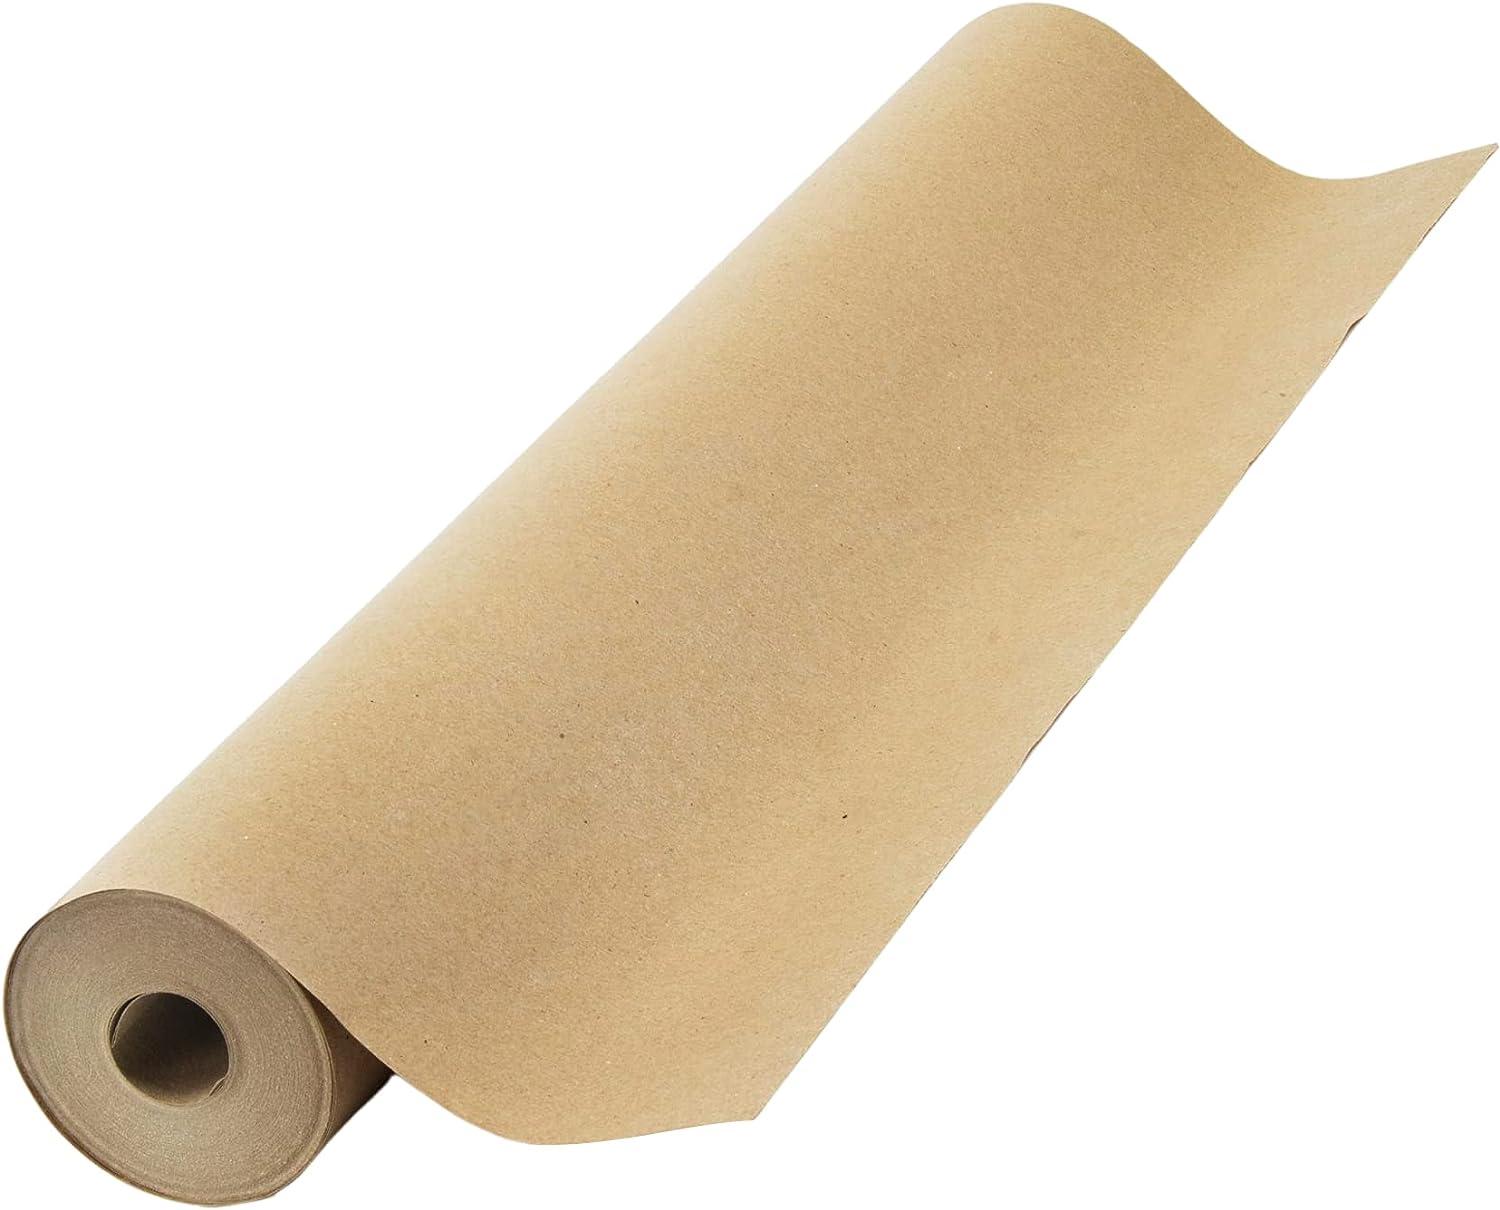 Brown Kraft Paper Roll 36” x 720 ft Roll, 100% Recycled Material.